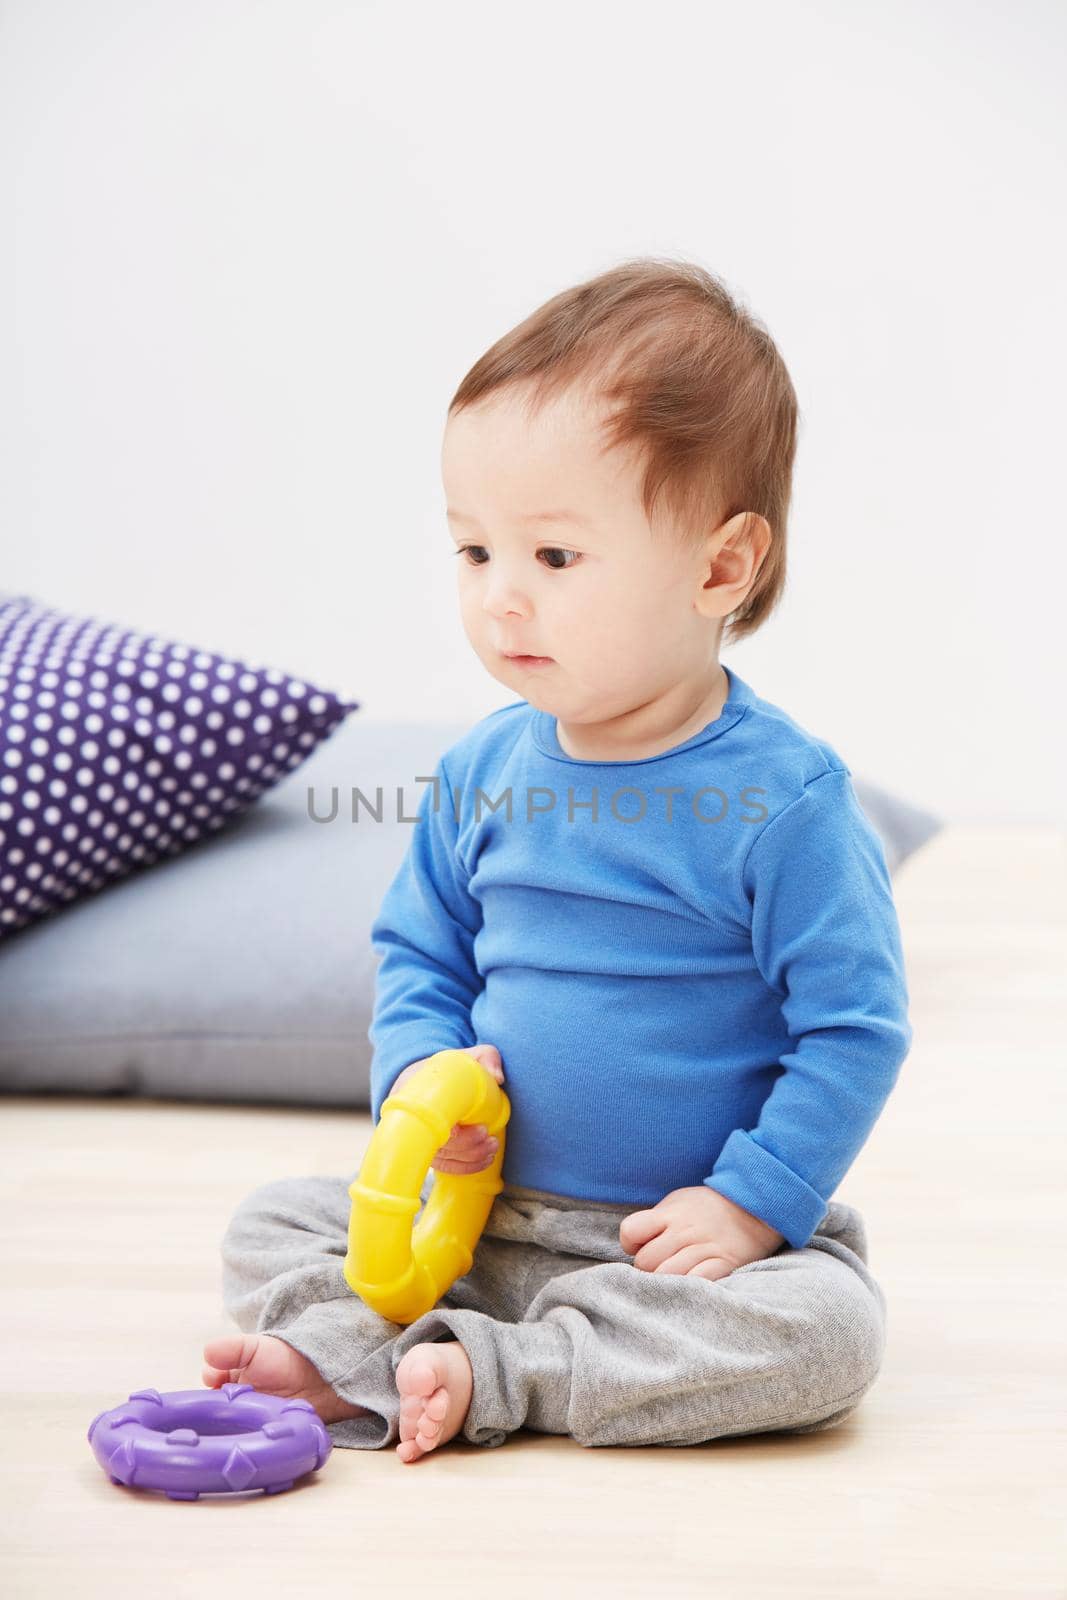 Shot of a cute baby boy sitting on the floor and playing with his toys.